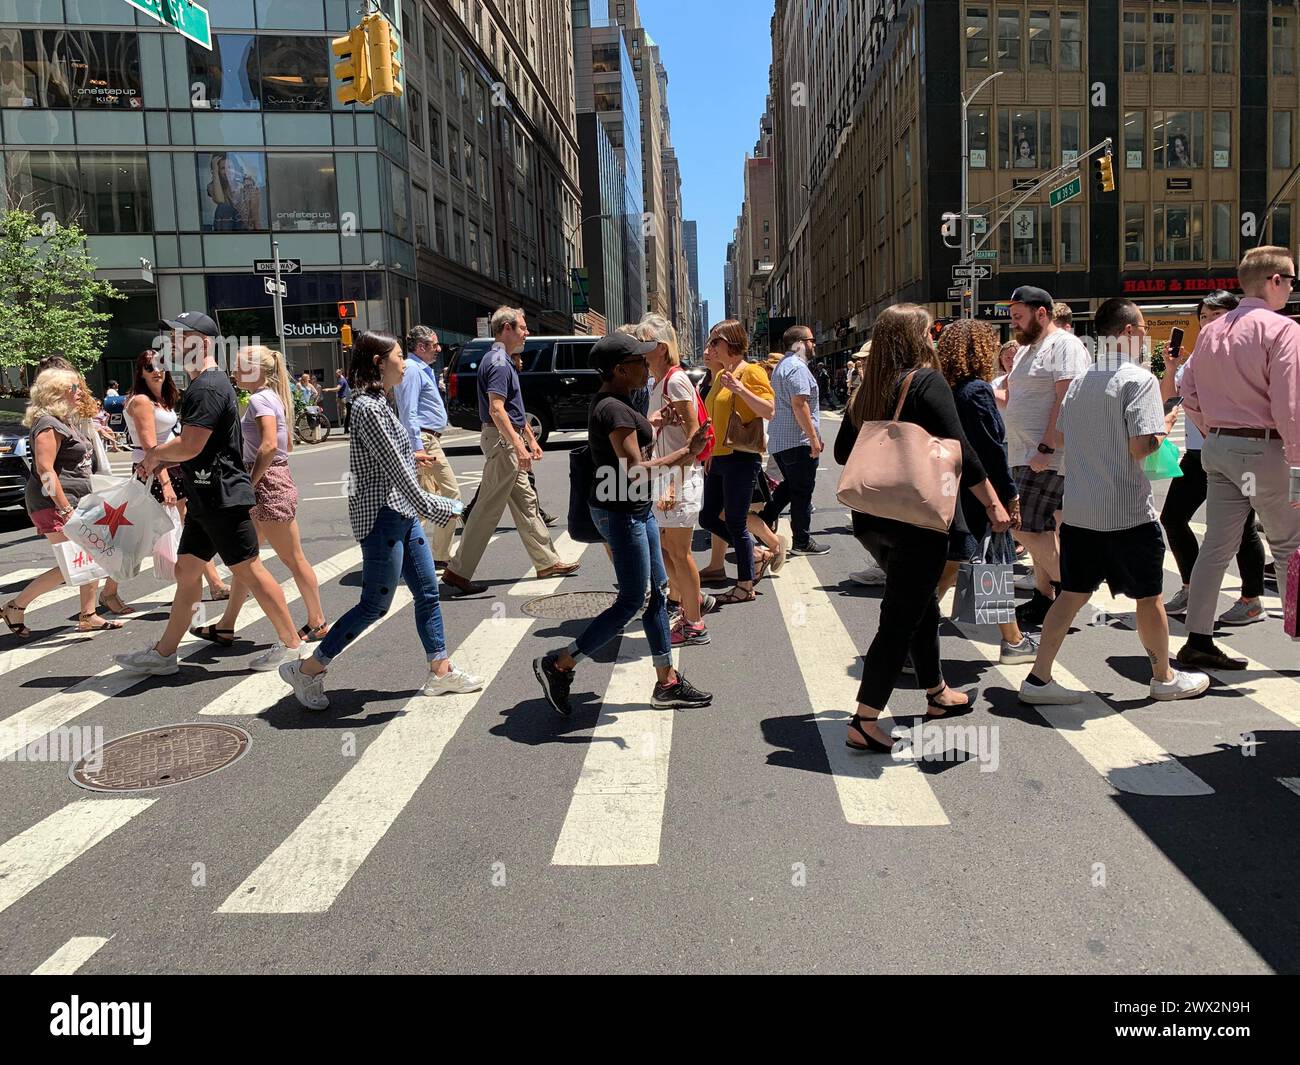 Pedestrians and travelers walk and cross the street using the crosswalk during lunch time in New York City Stock Photo